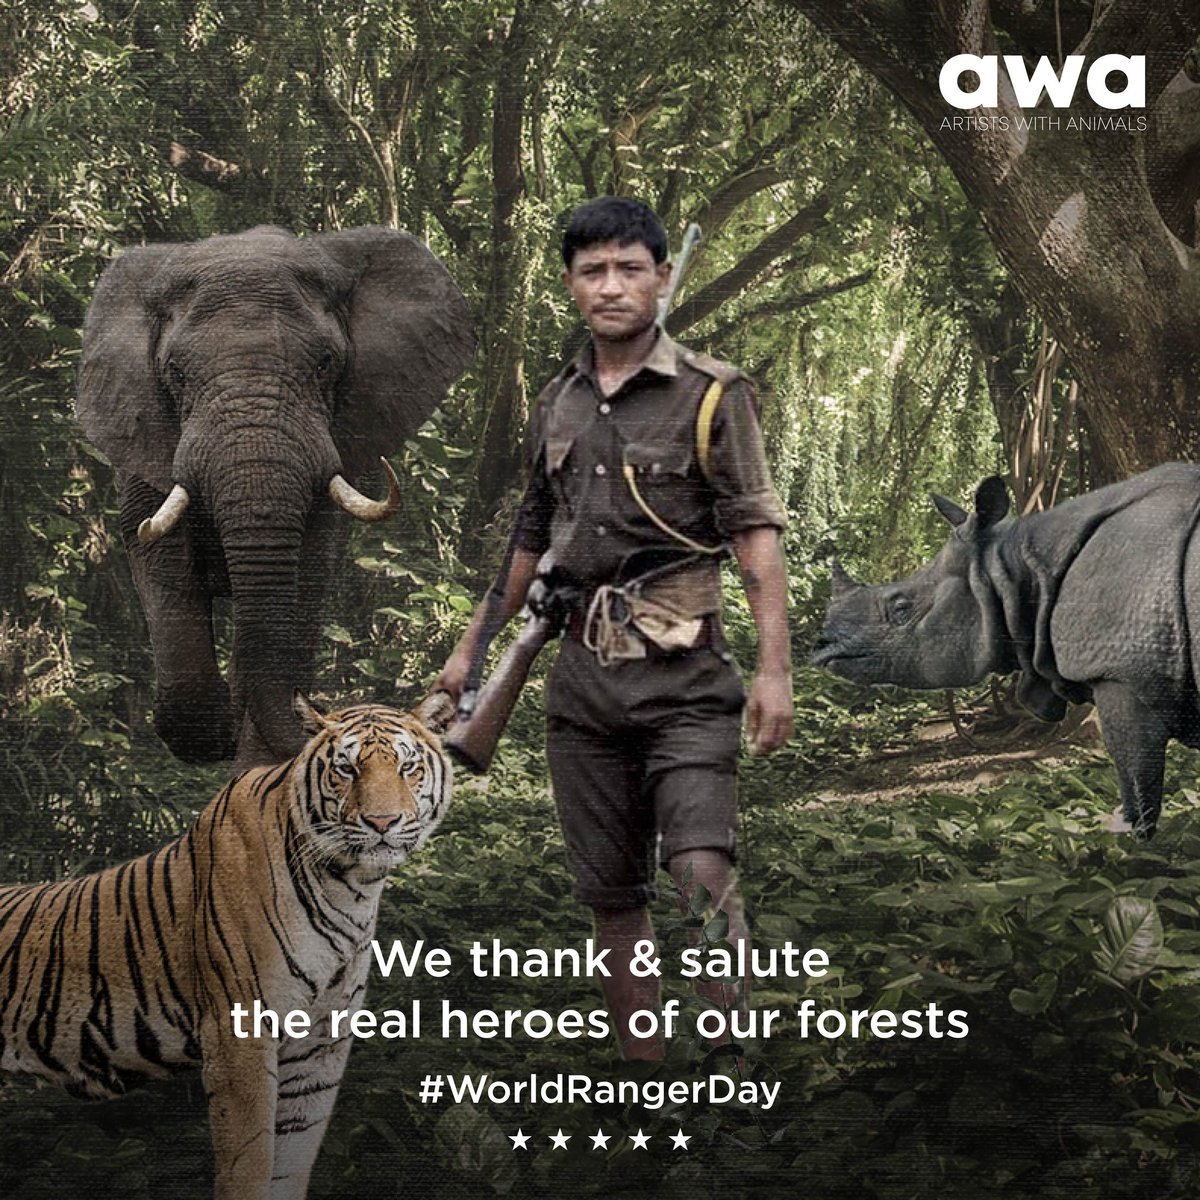 From patrolling the forests, protecting our wildlife from poachers, surviving wild animal attacks to confronting angry villagers, our #ForestGuards do it all. They protect animals in the home, the forest while being away from their own home
Thank you #VanRakshaks #WorldRangerDay